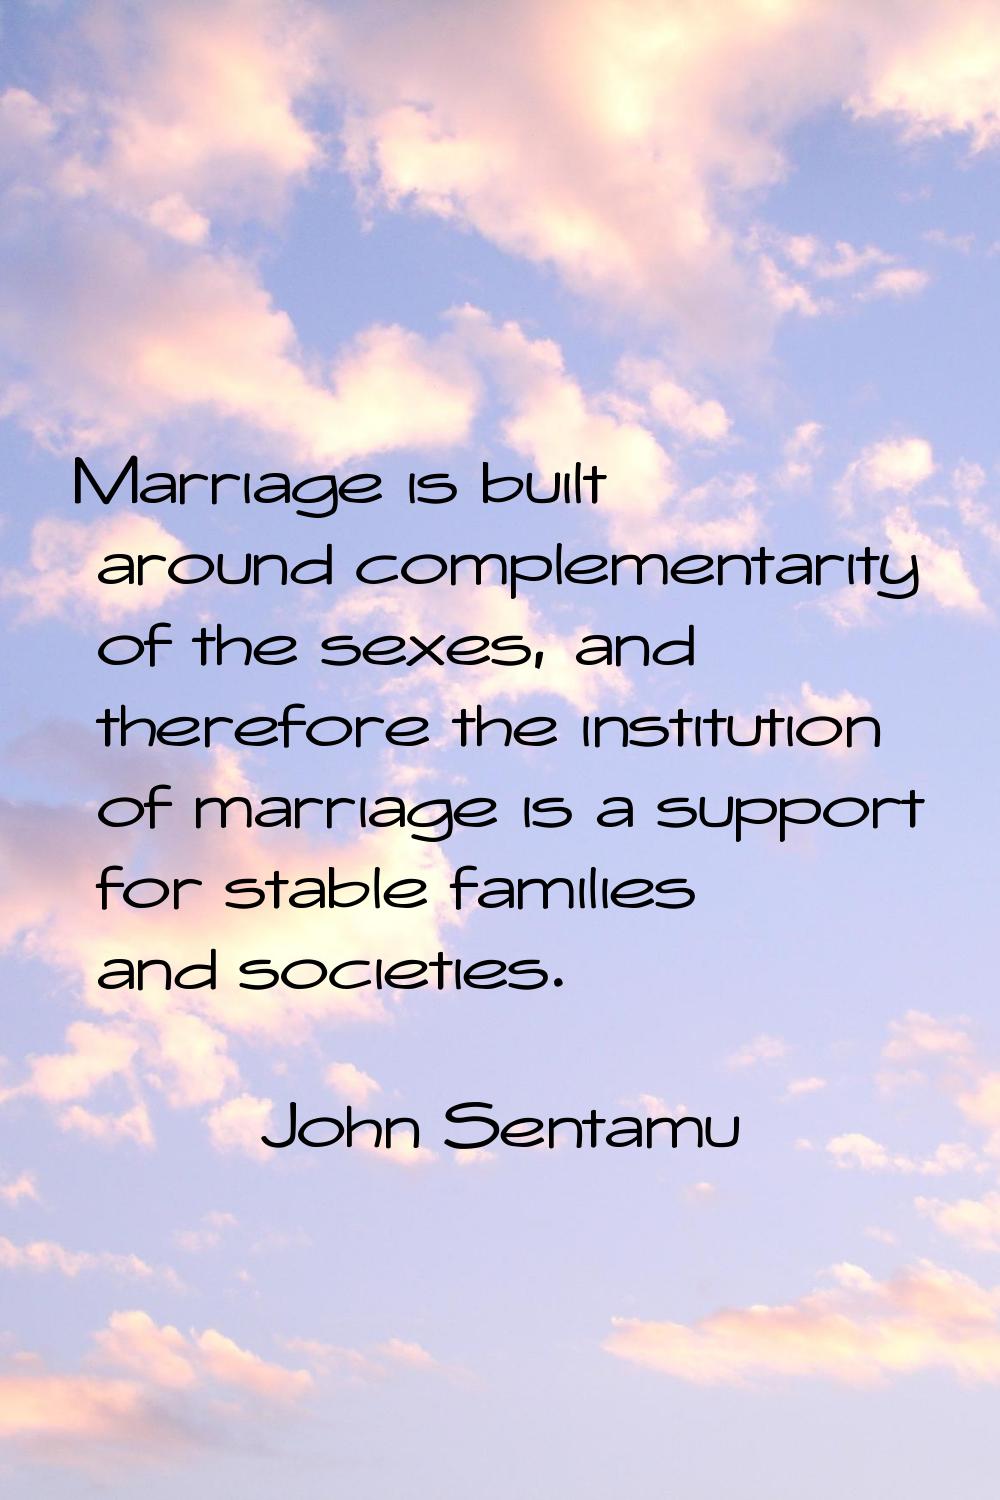 Marriage is built around complementarity of the sexes, and therefore the institution of marriage is